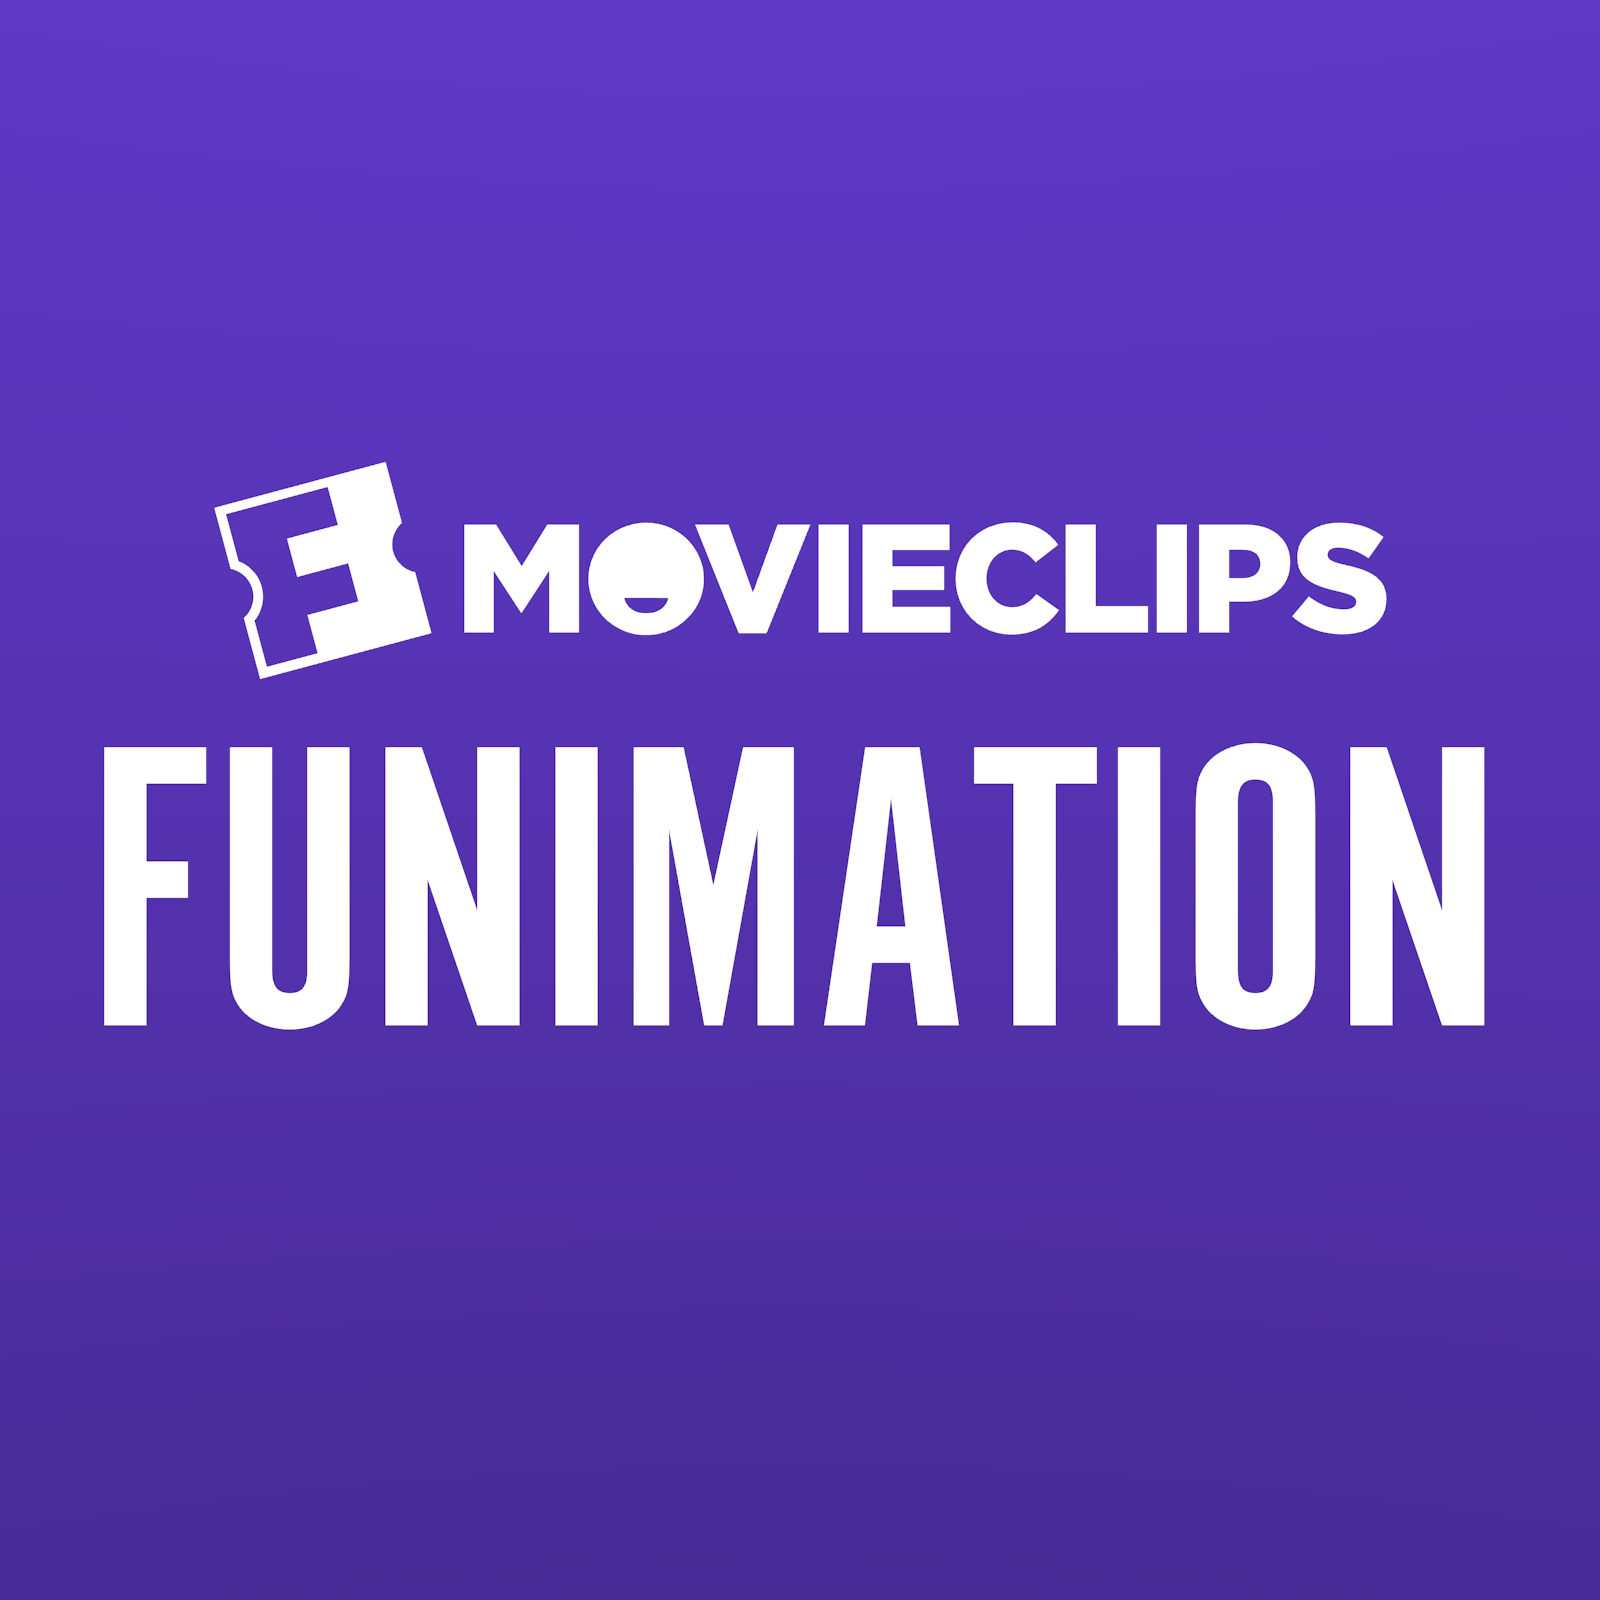 Movieclips 